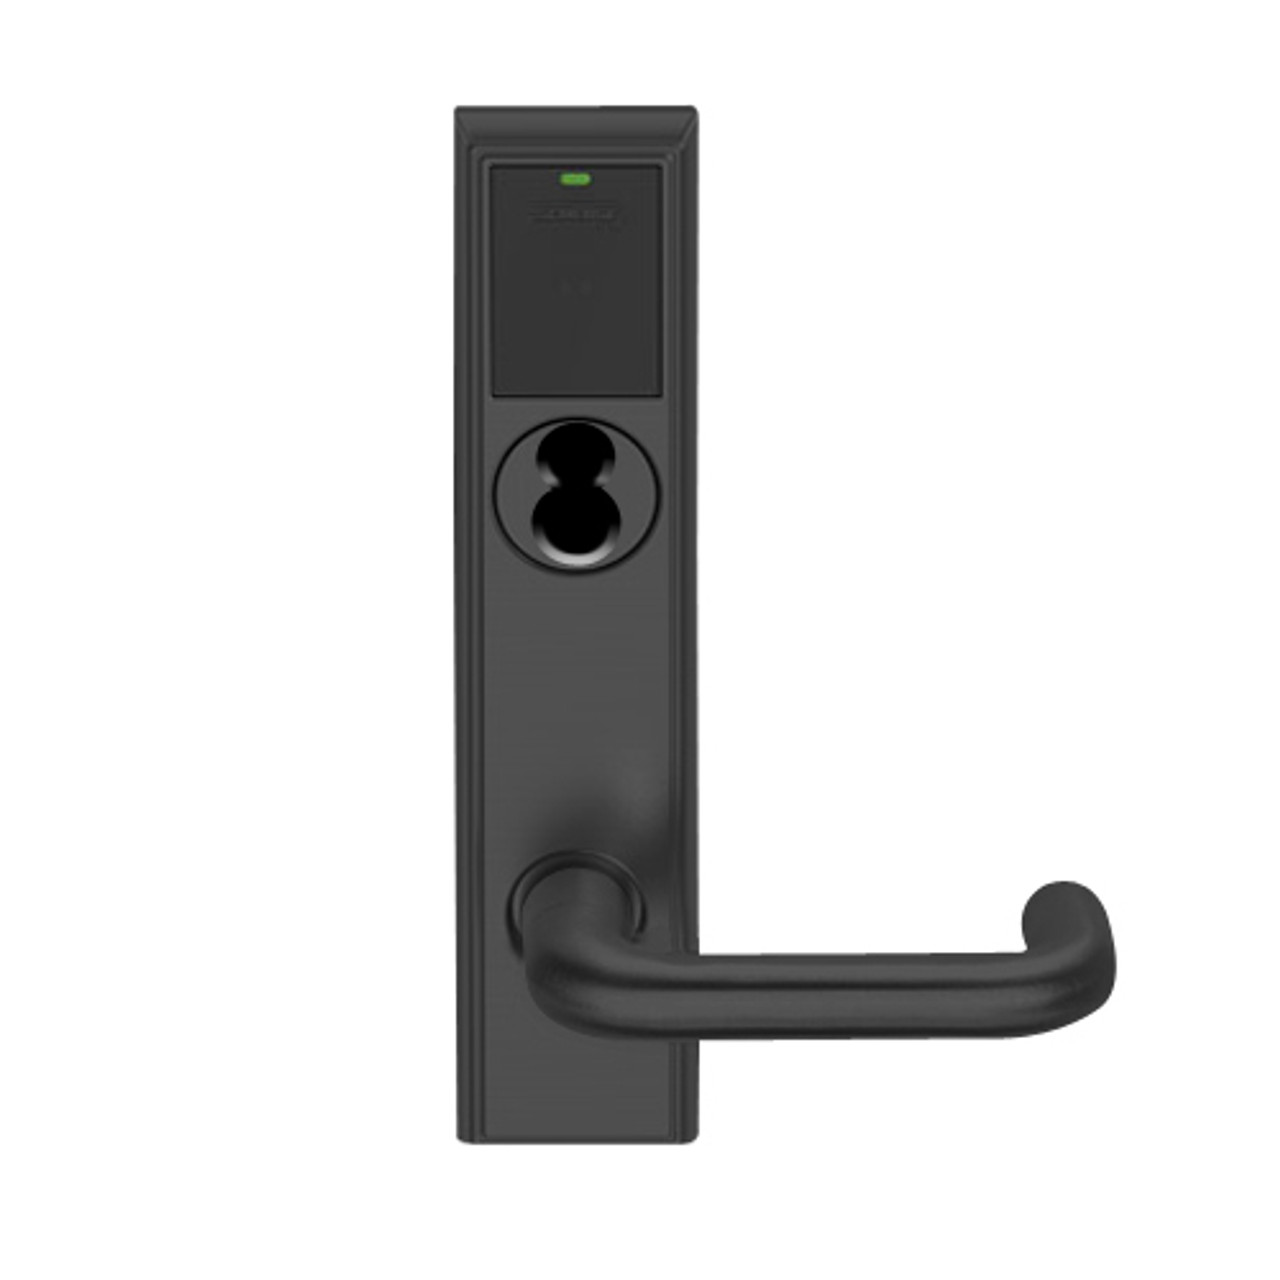 LEMB-ADD-J-03-622 Schlage Privacy/Office Wireless Addison Mortise Lock with Push Button, LED and Tubular Lever Prepped for FSIC in Matte Black